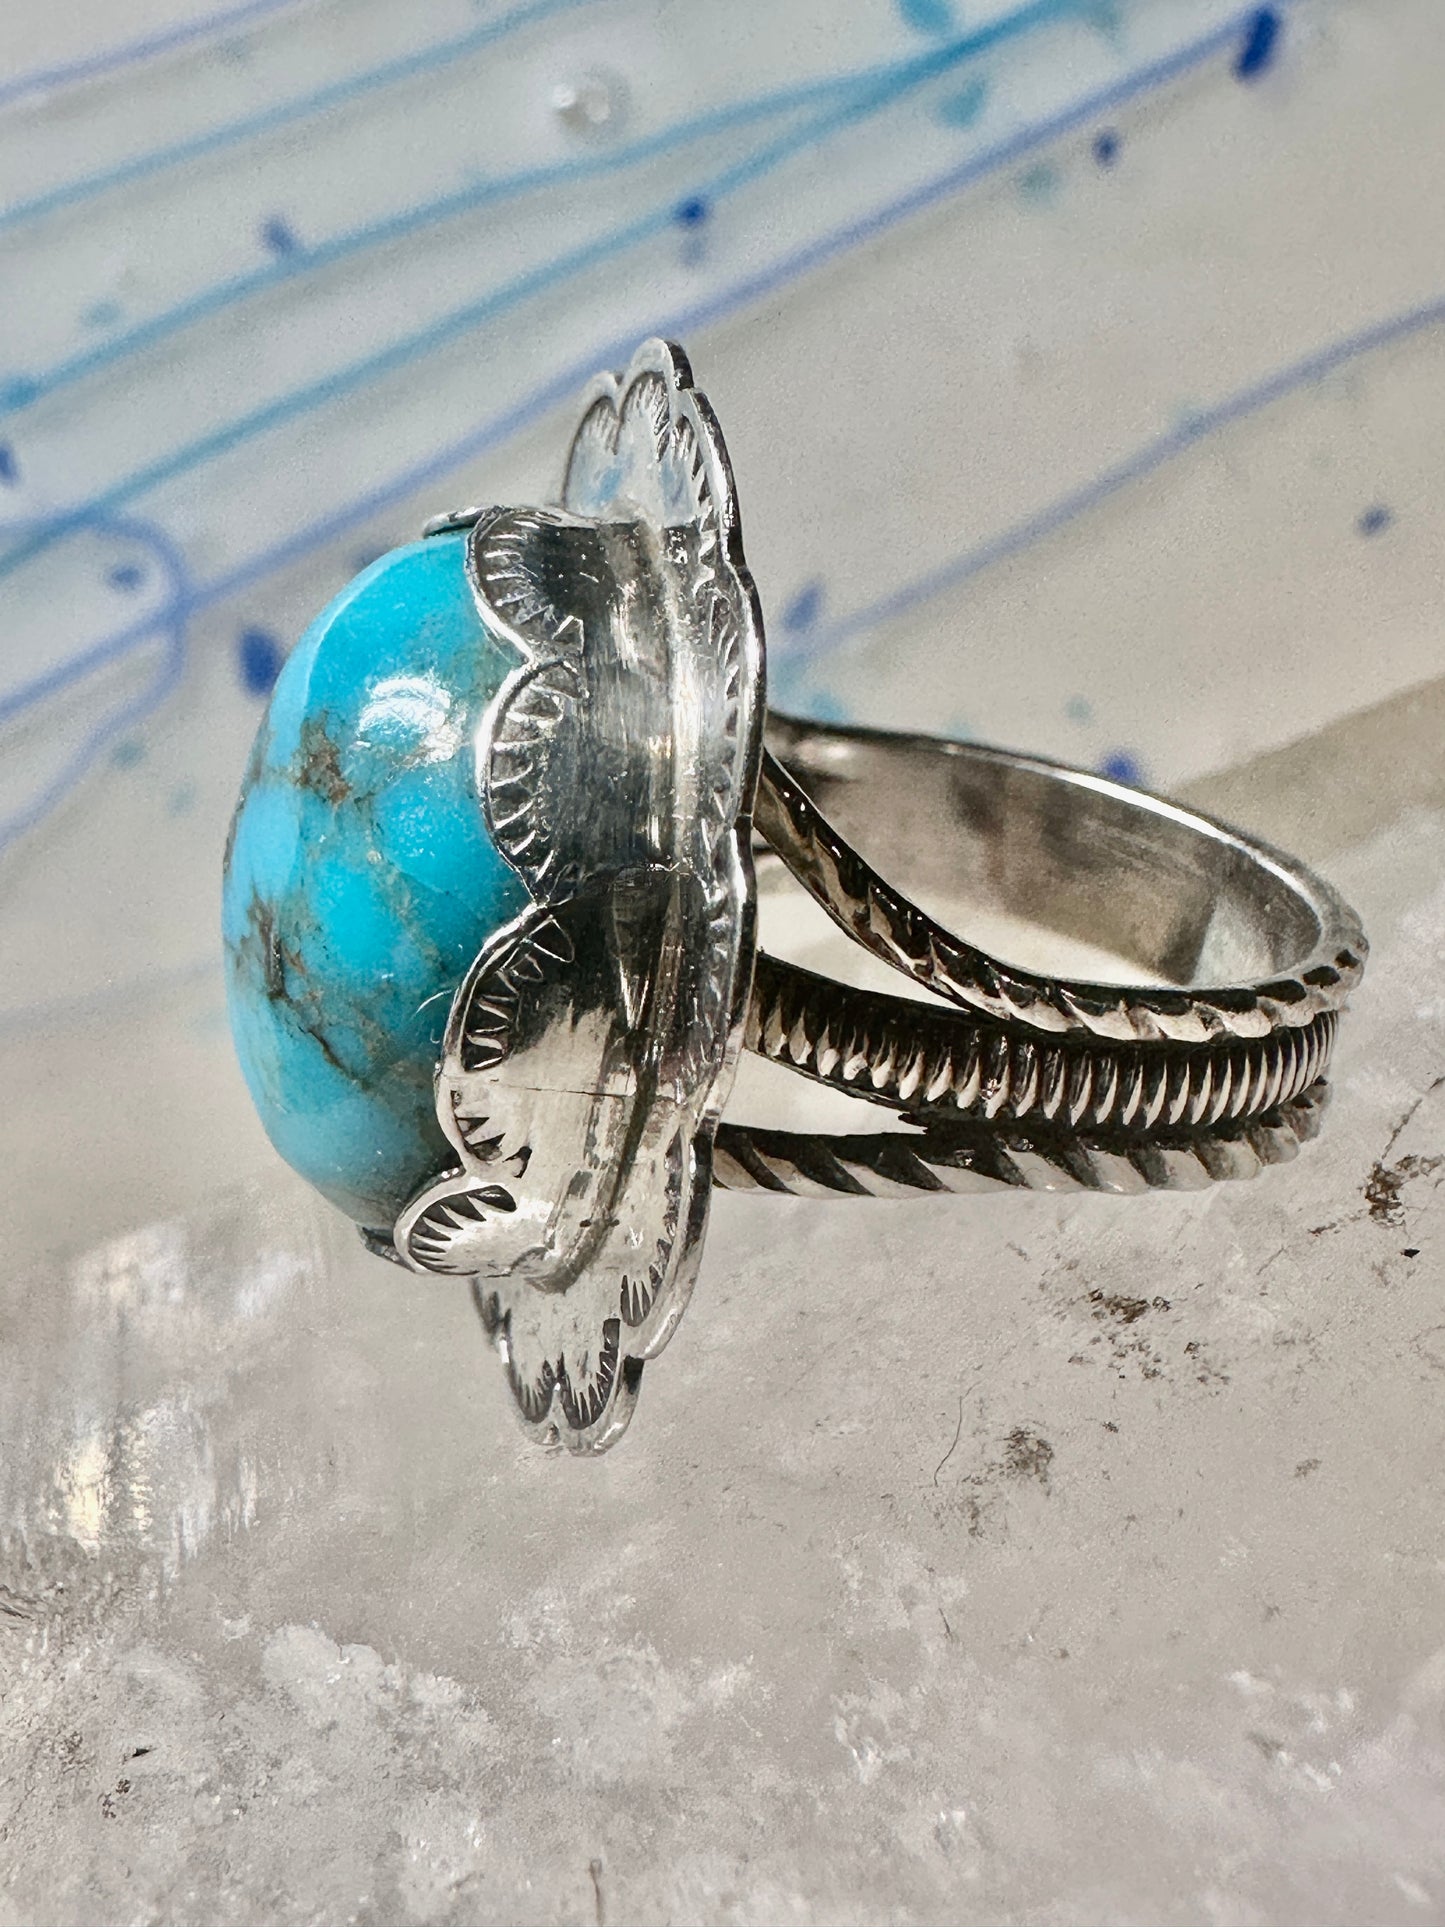 Navajo ring size 7 Turquoise signed CLA sterling silver men women